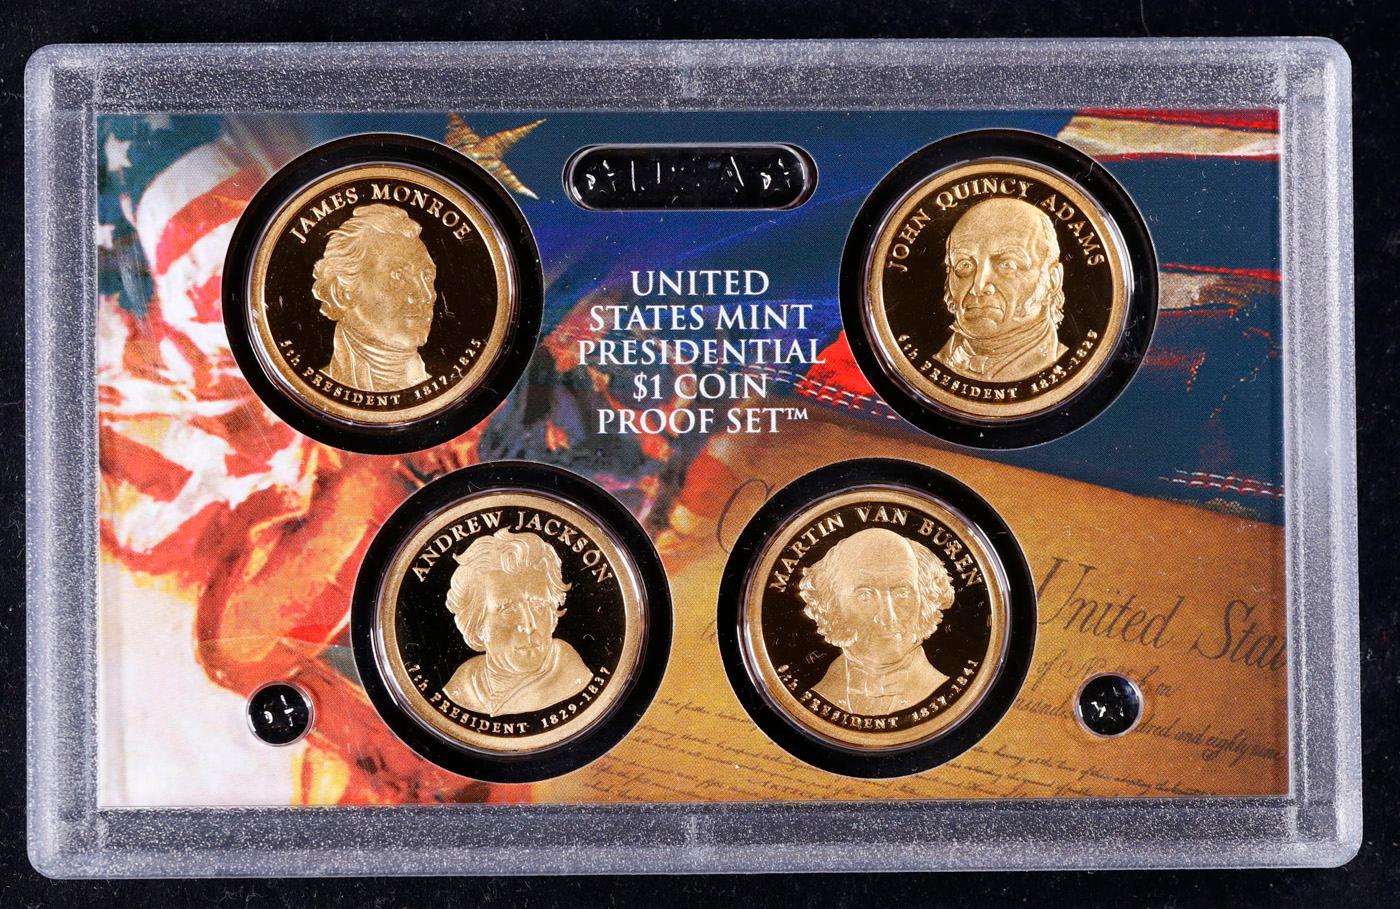 2008 United State Mint Presidential Dollar Proof Set. 4 Coins Inside.